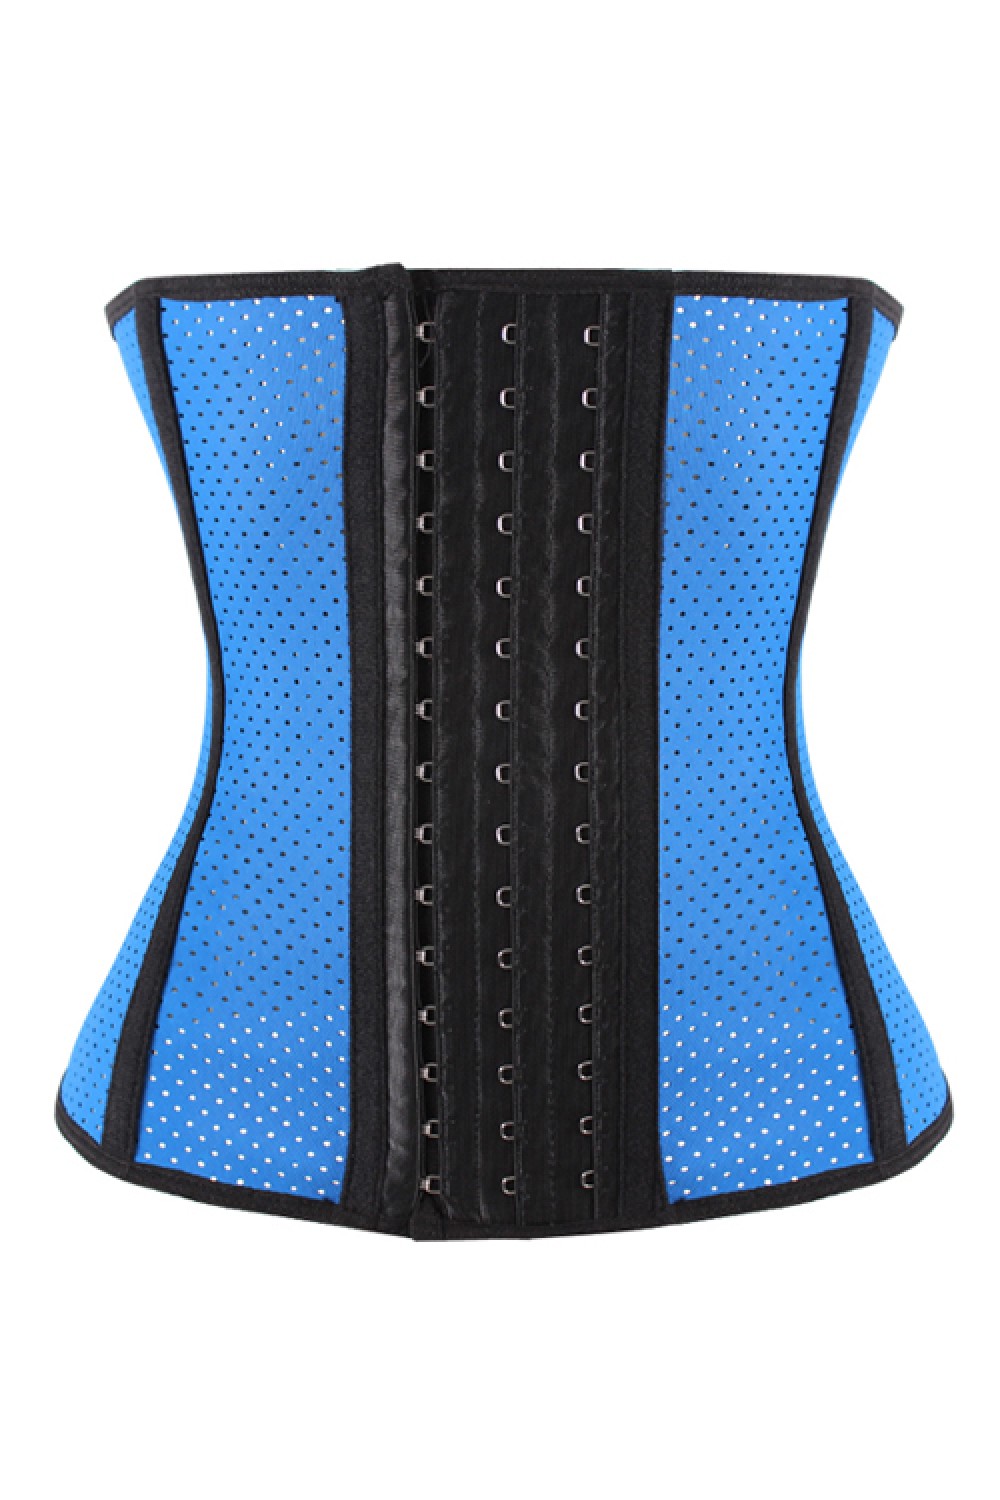 Breathable 3 Rows Hooks Hollow Out Waist Cincher Hourglass Figure